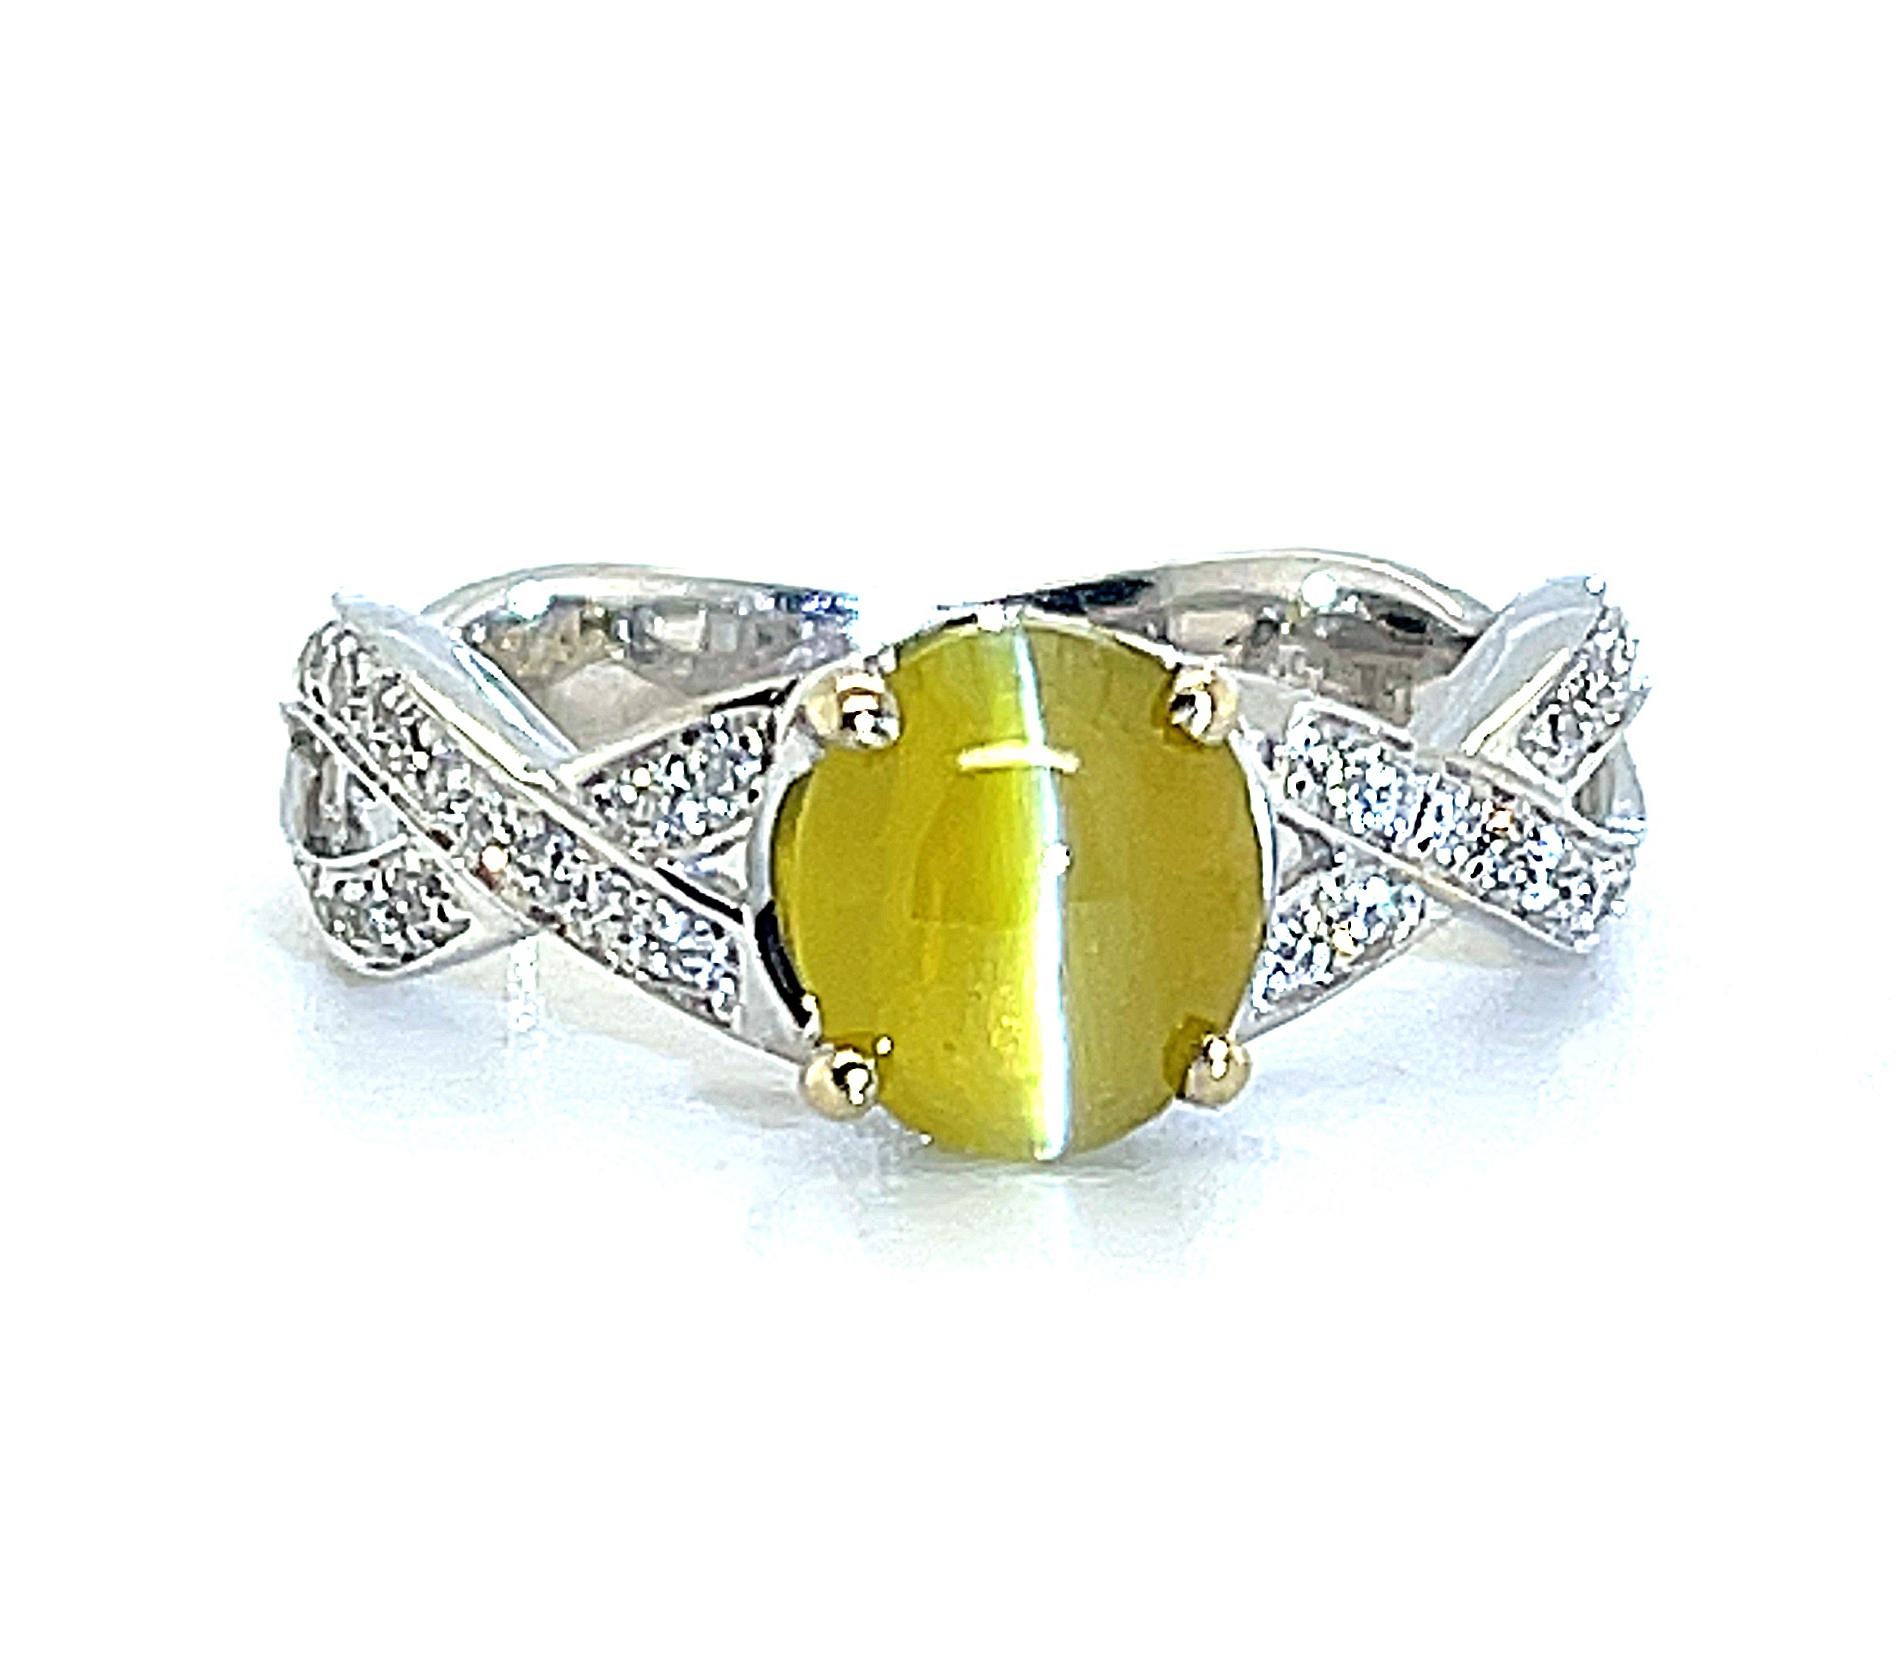 A fine, 1.73 carat cat's eye chrysoberyl cabochon is set with sparkling round diamonds in this 18 karat white gold band ring. The cat's eye is a gorgeous, golden-honey color with a clean, sharp eye and excellent transparency. The elegant, criss